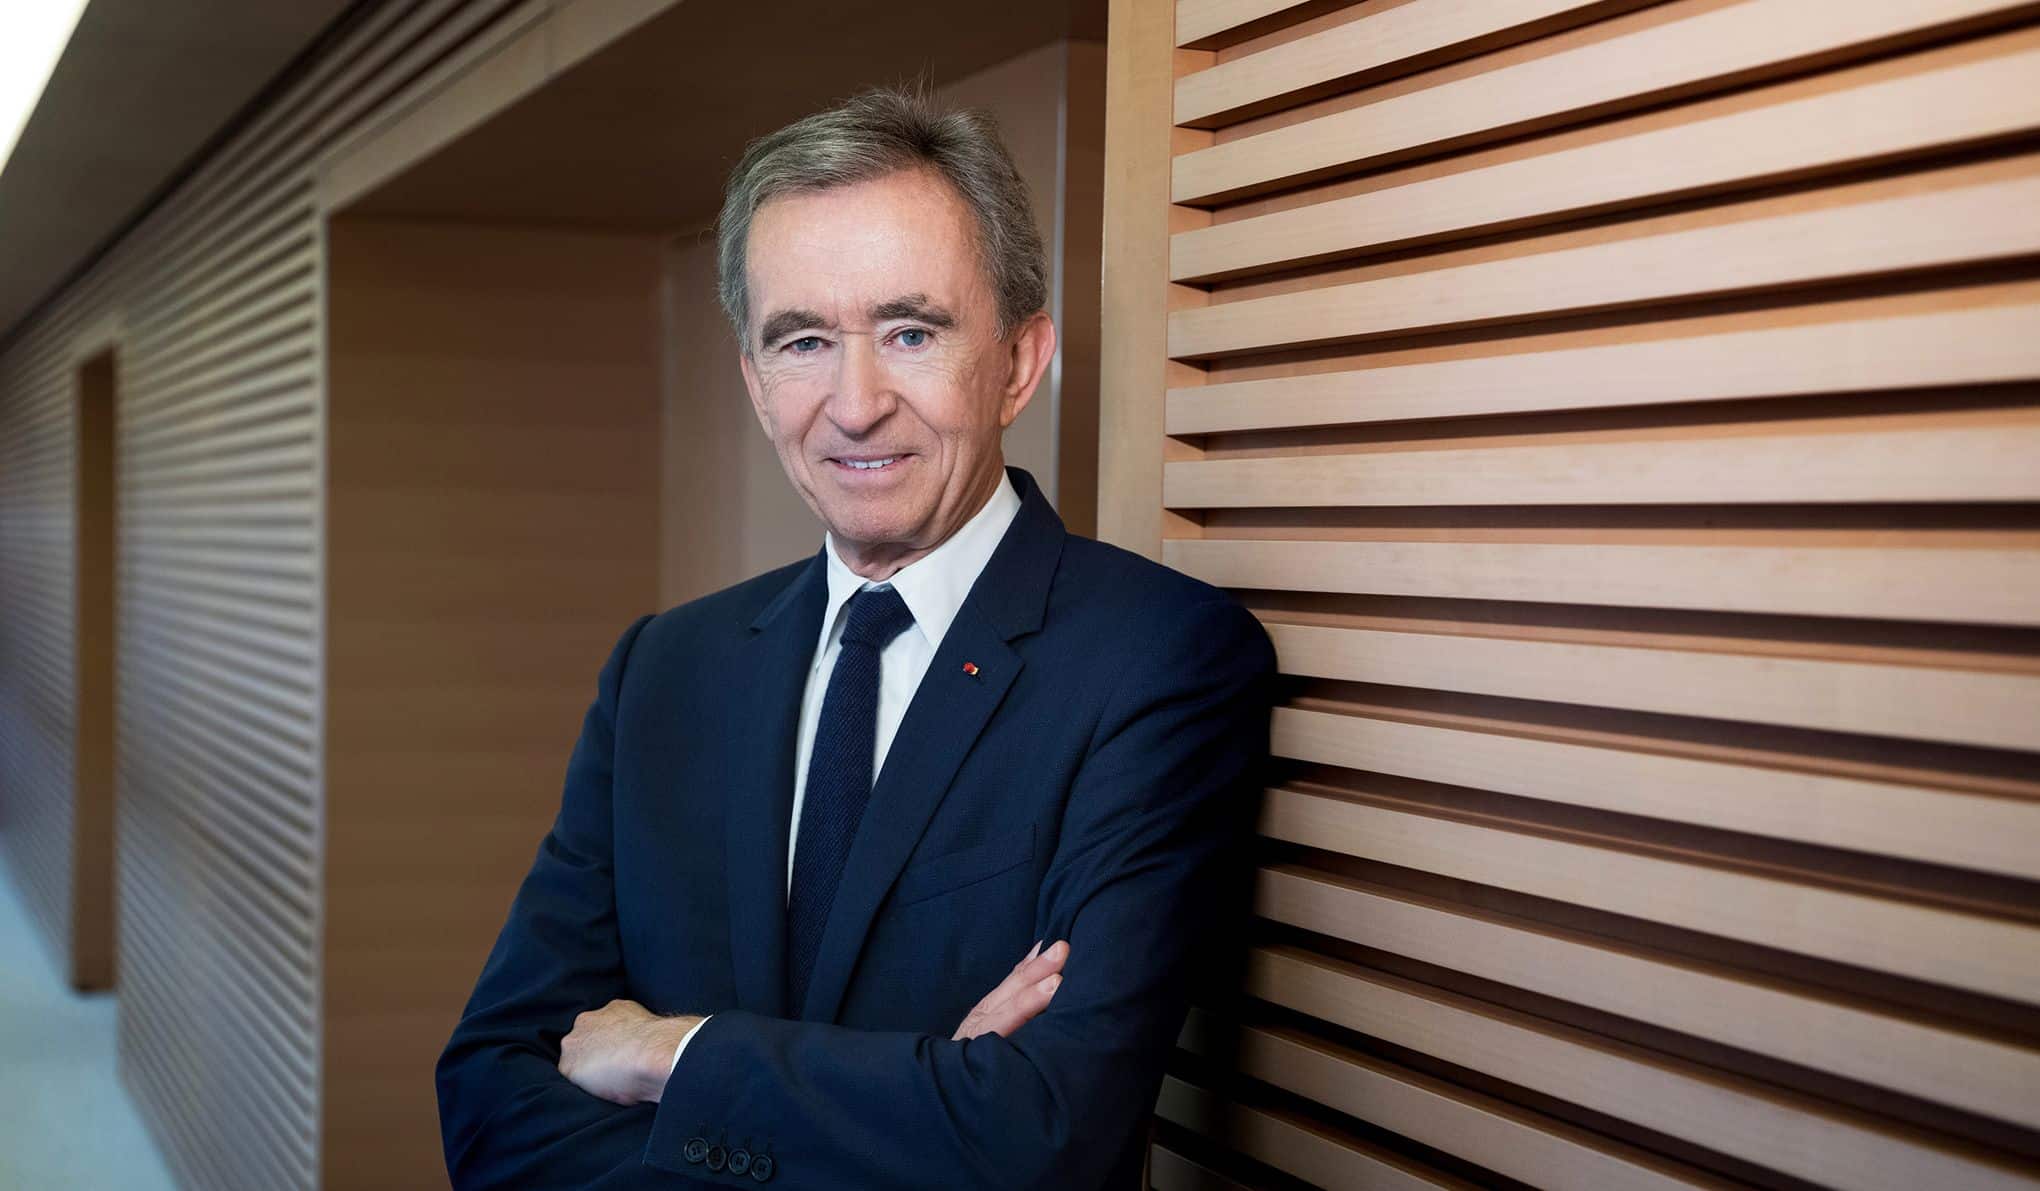 LVMH head Bernard Arnault kicks off China trip with tour of country's  upscale malls